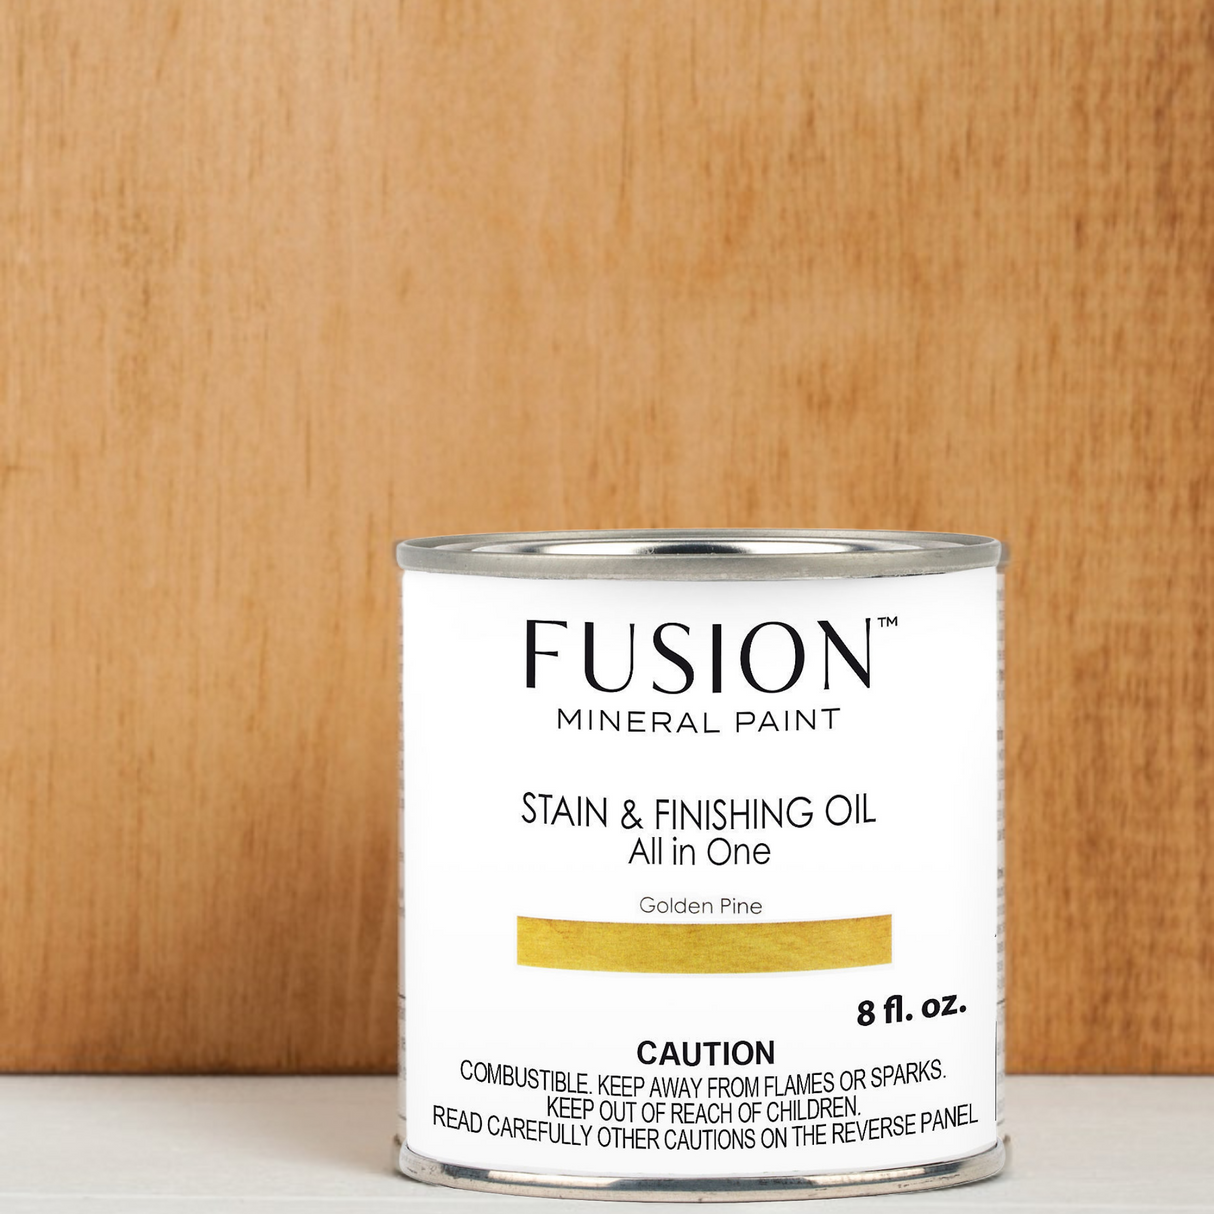 Stain & Finishing Oil - All In One by Fusion Mineral Paint